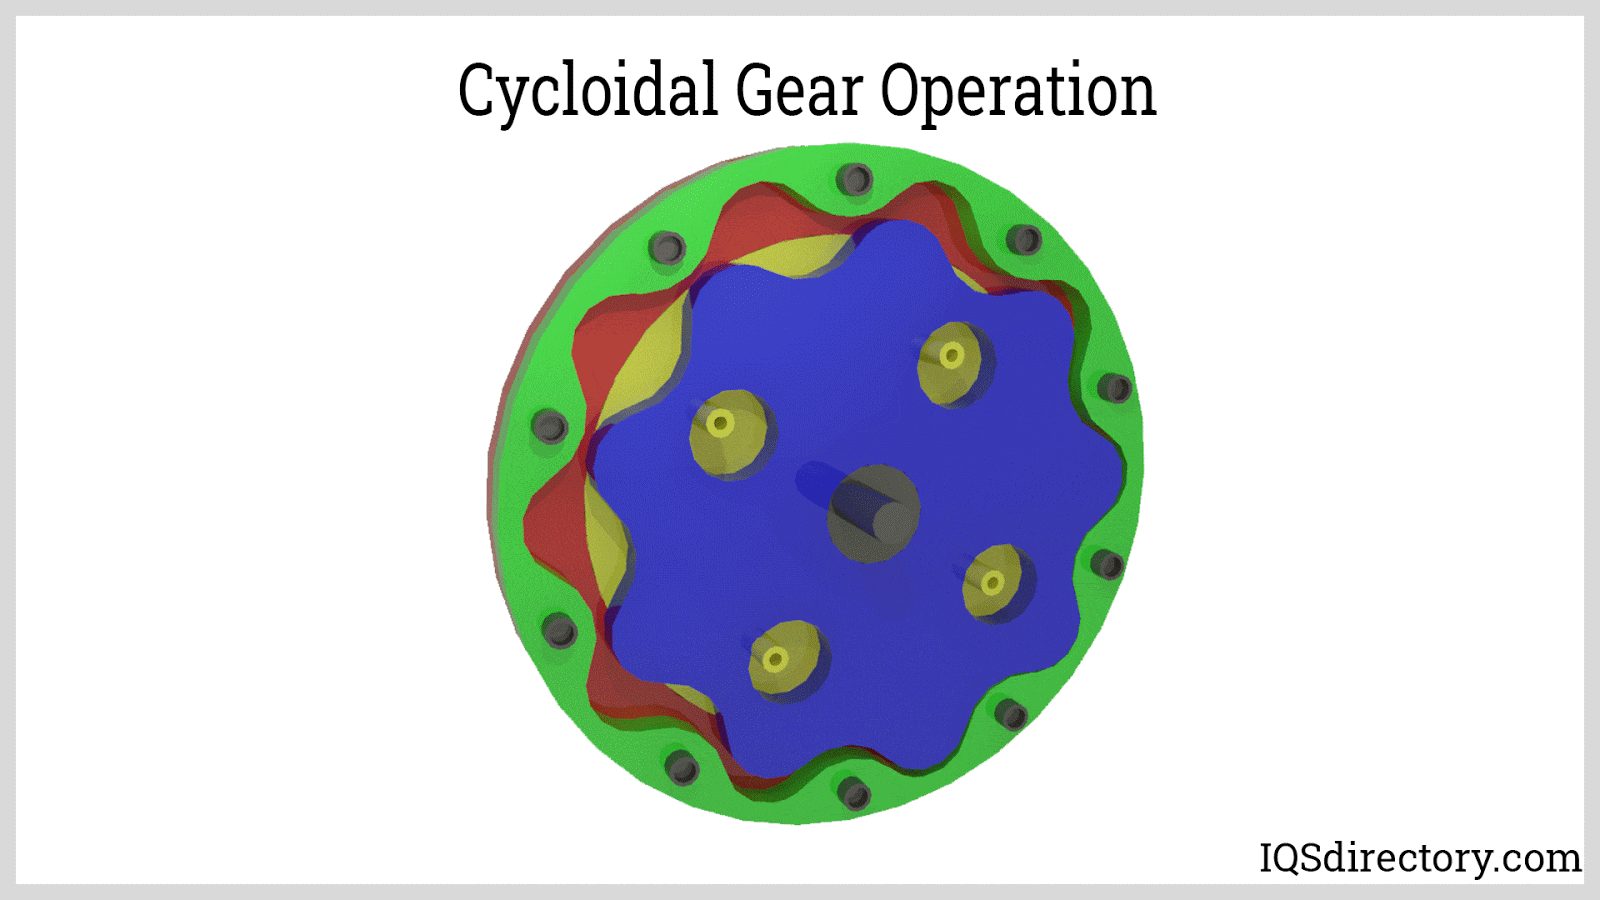 Cyclodical Gear Operation